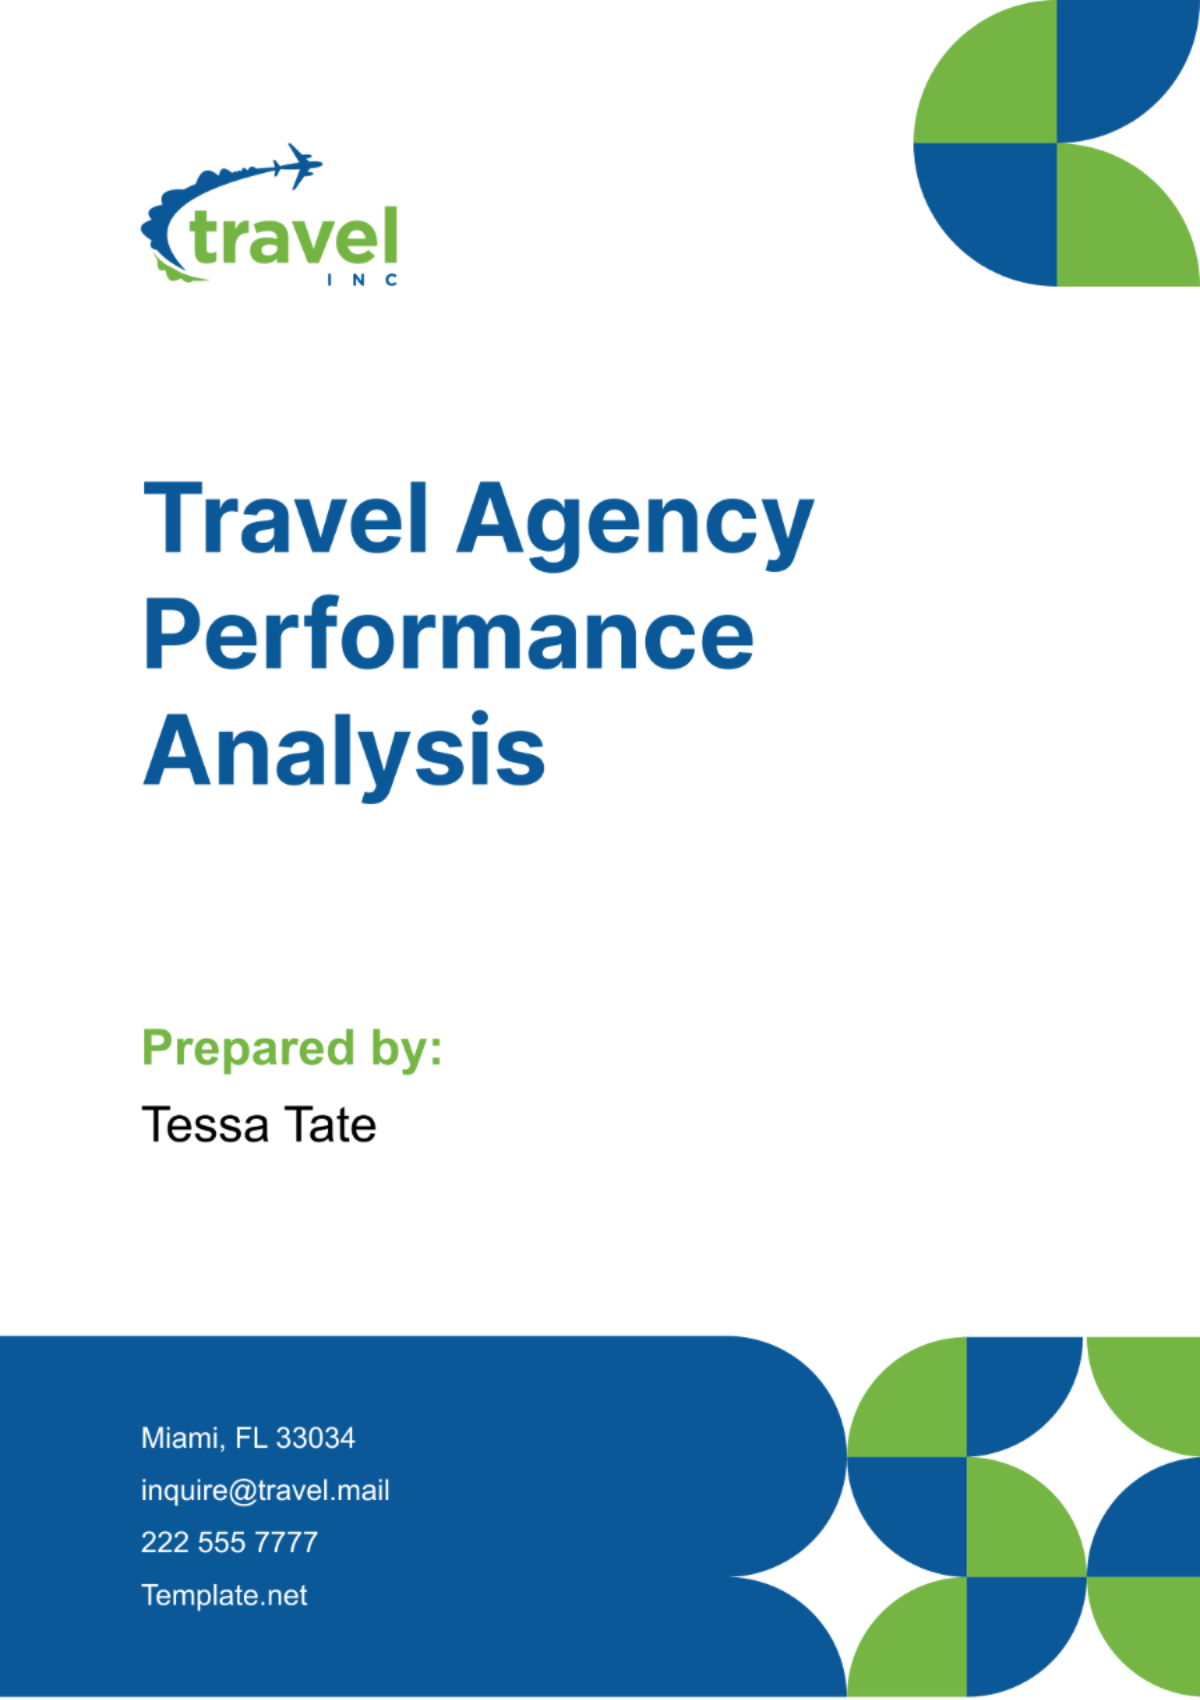 Travel Agency Performance Analysis Template